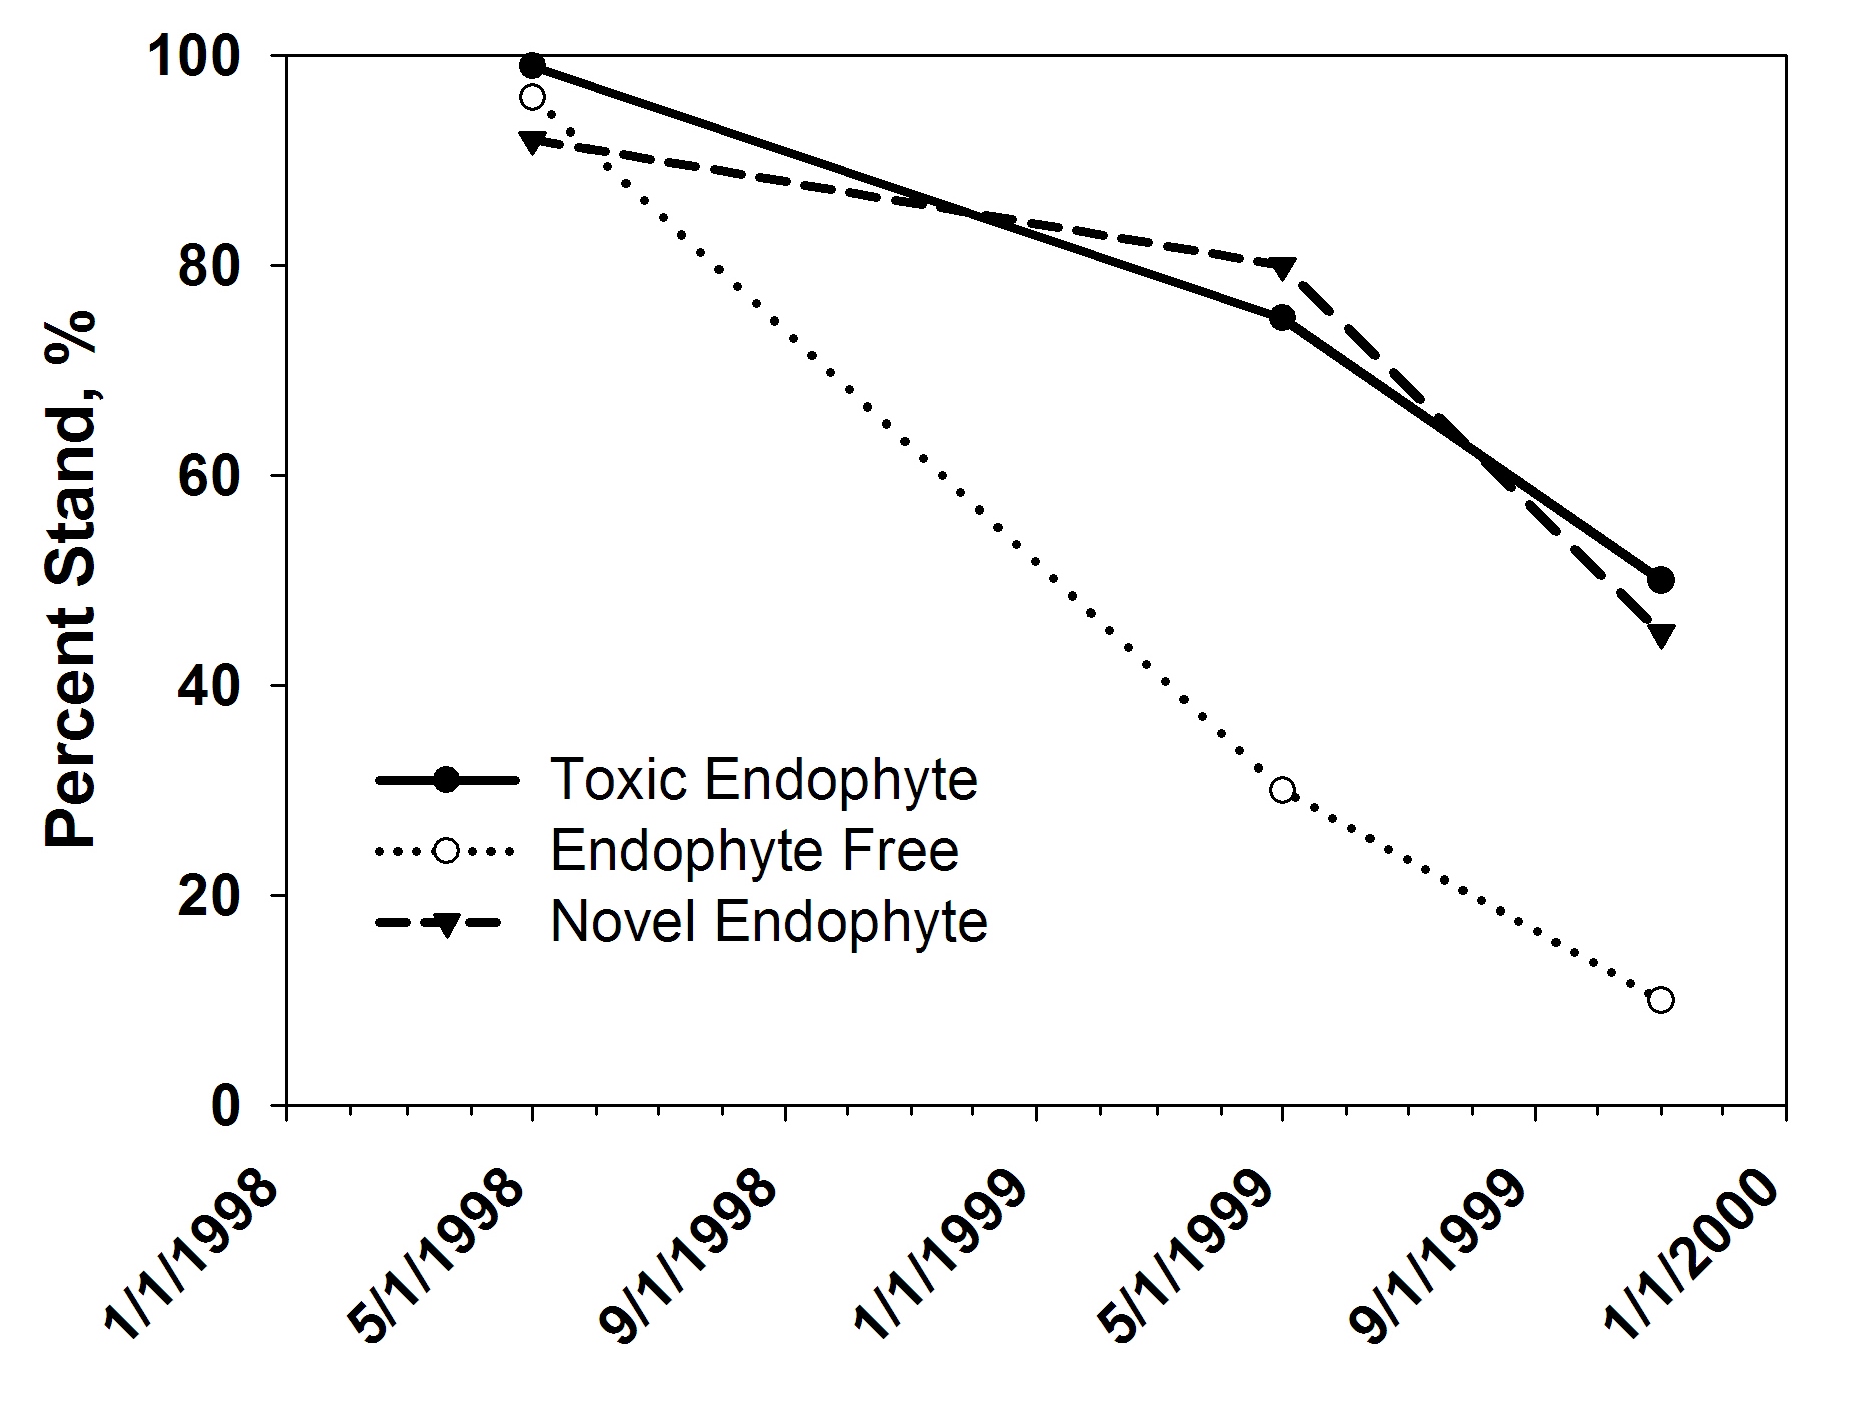 Figure 2. Stand persistence of novel endophyte-infected (Jesup MaxQ), toxic endophyte-infected, and endophyte- free tall fescue in bermudagrass sod after two years of close grazing near Eatonton, Ga. (Bouton et al., 2000).